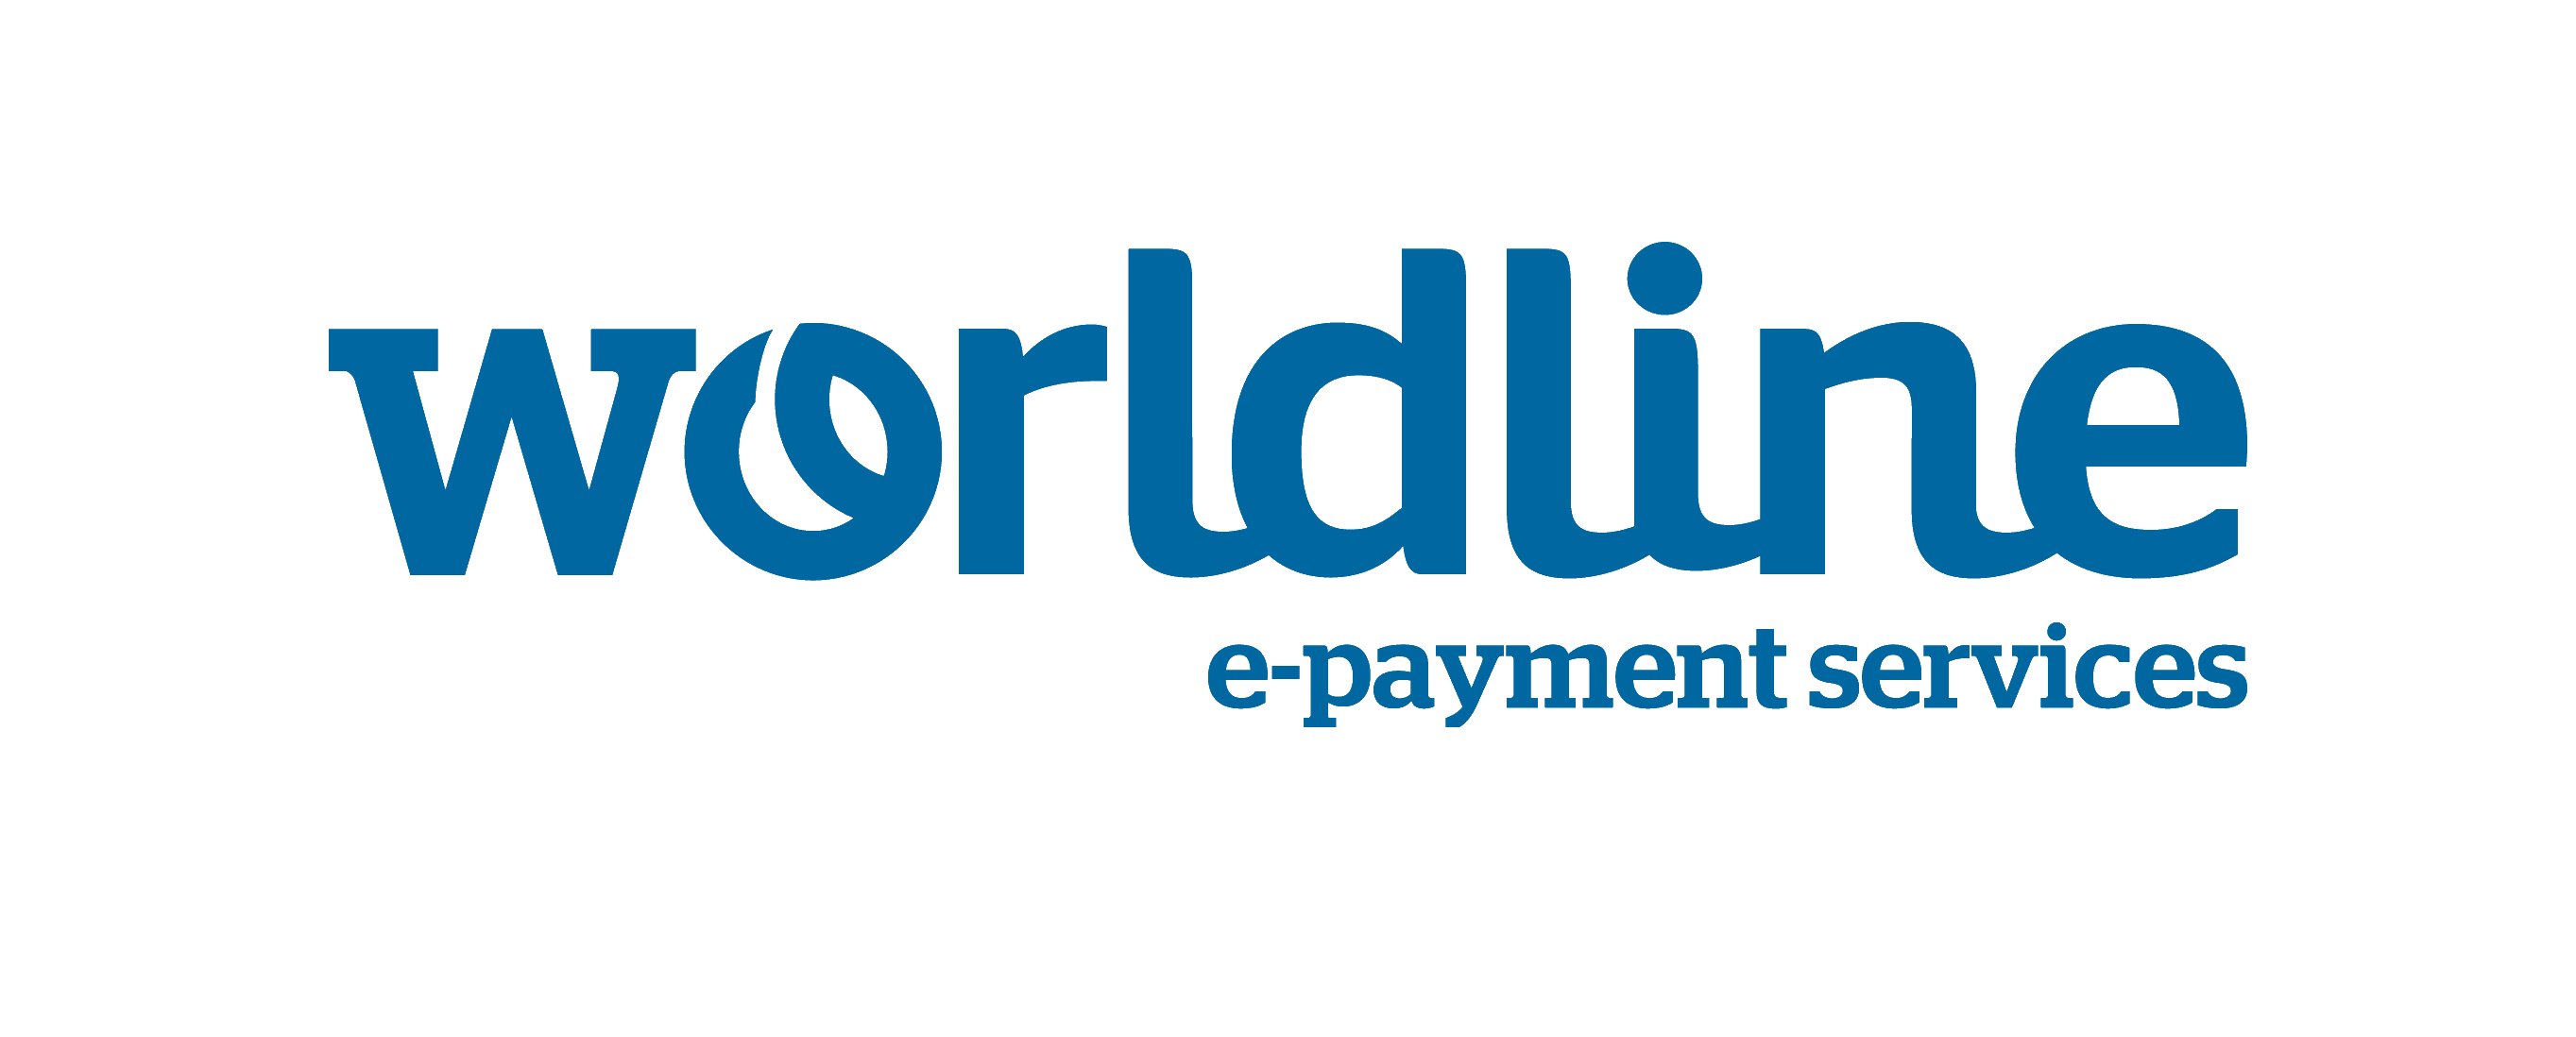 Worldline acquires Ingenico to form a new payment leader